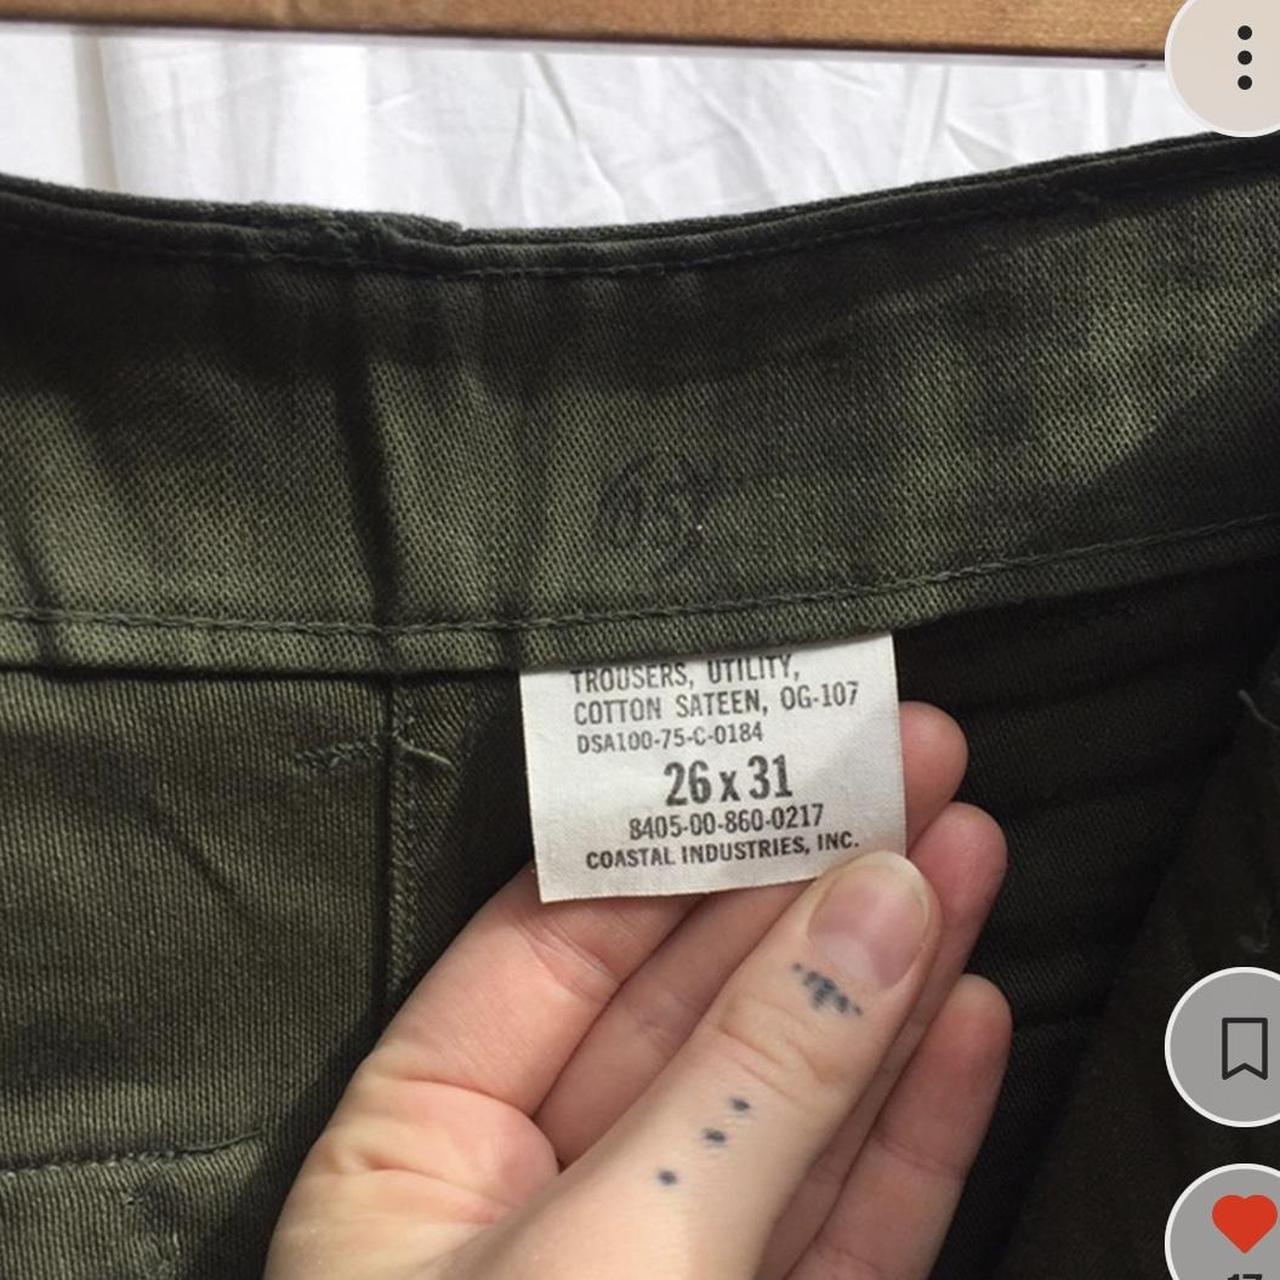 DEADSTOCK 70s Army Cargo Pants. Super high waisted,... - Depop